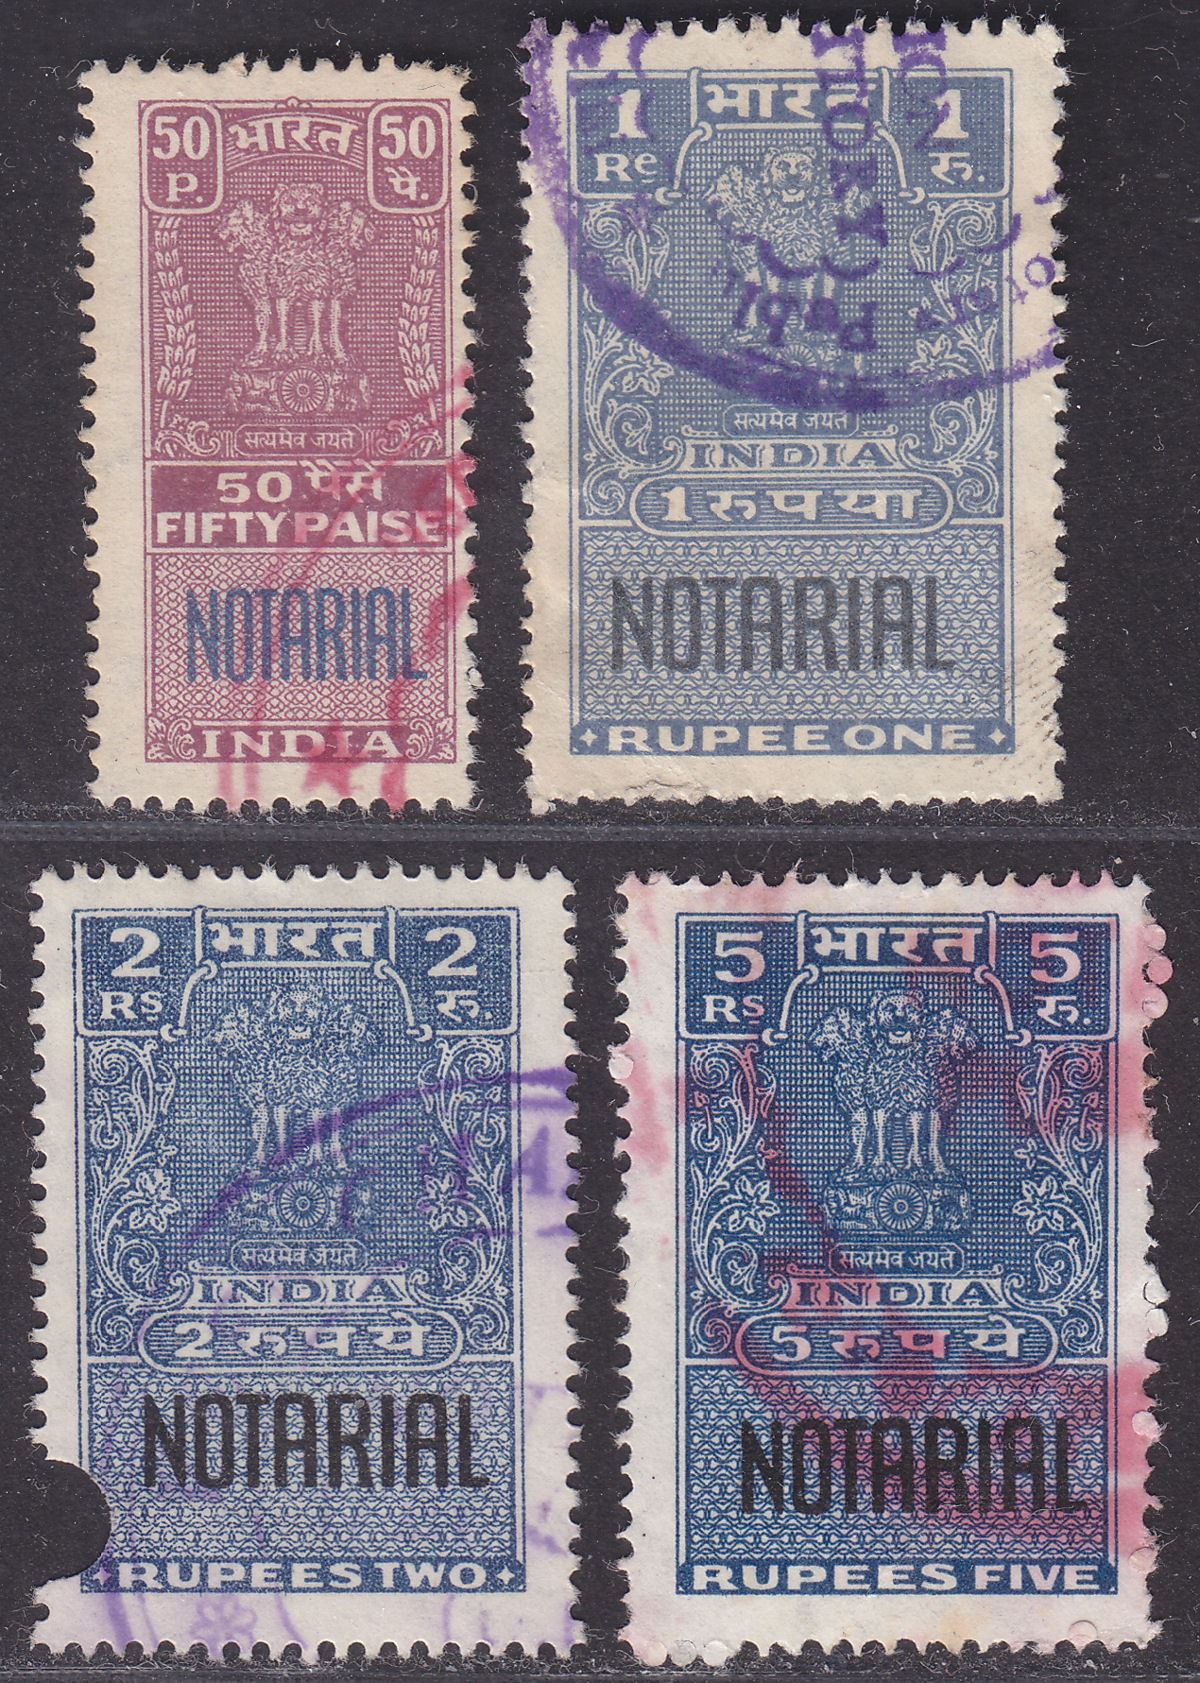 India 1980 Revenue Notarial Small Capital Pt Set to 5r Used BF80 BF81 BF82 BF84